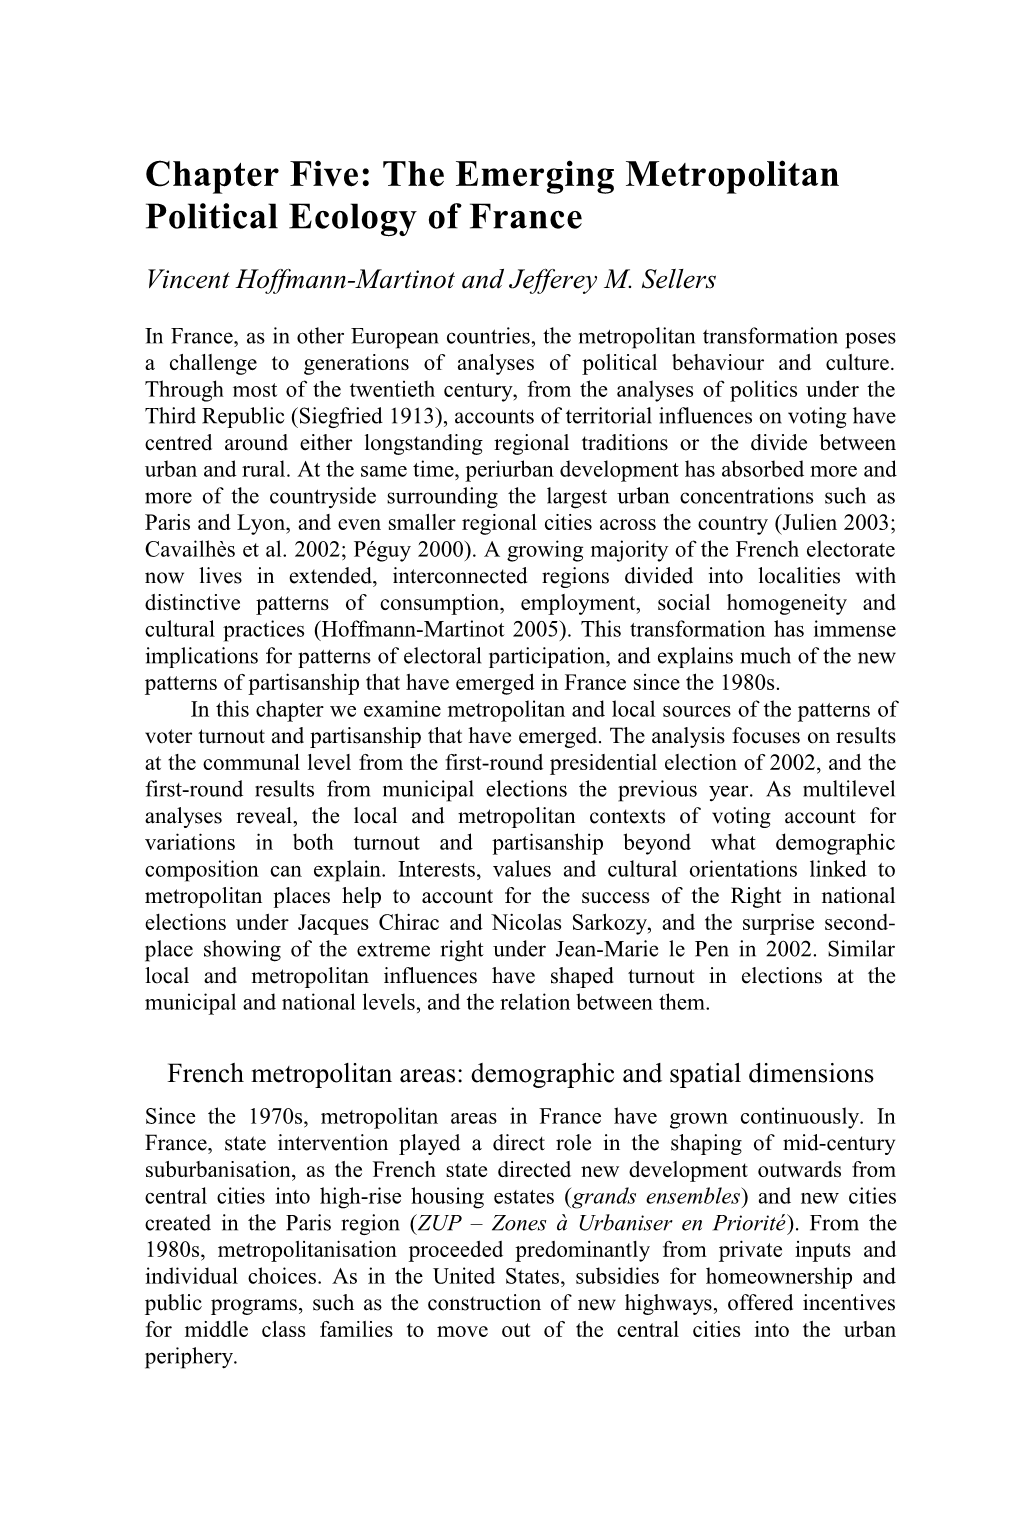 Chapter Five: the Emerging Metropolitan Political Ecology of France